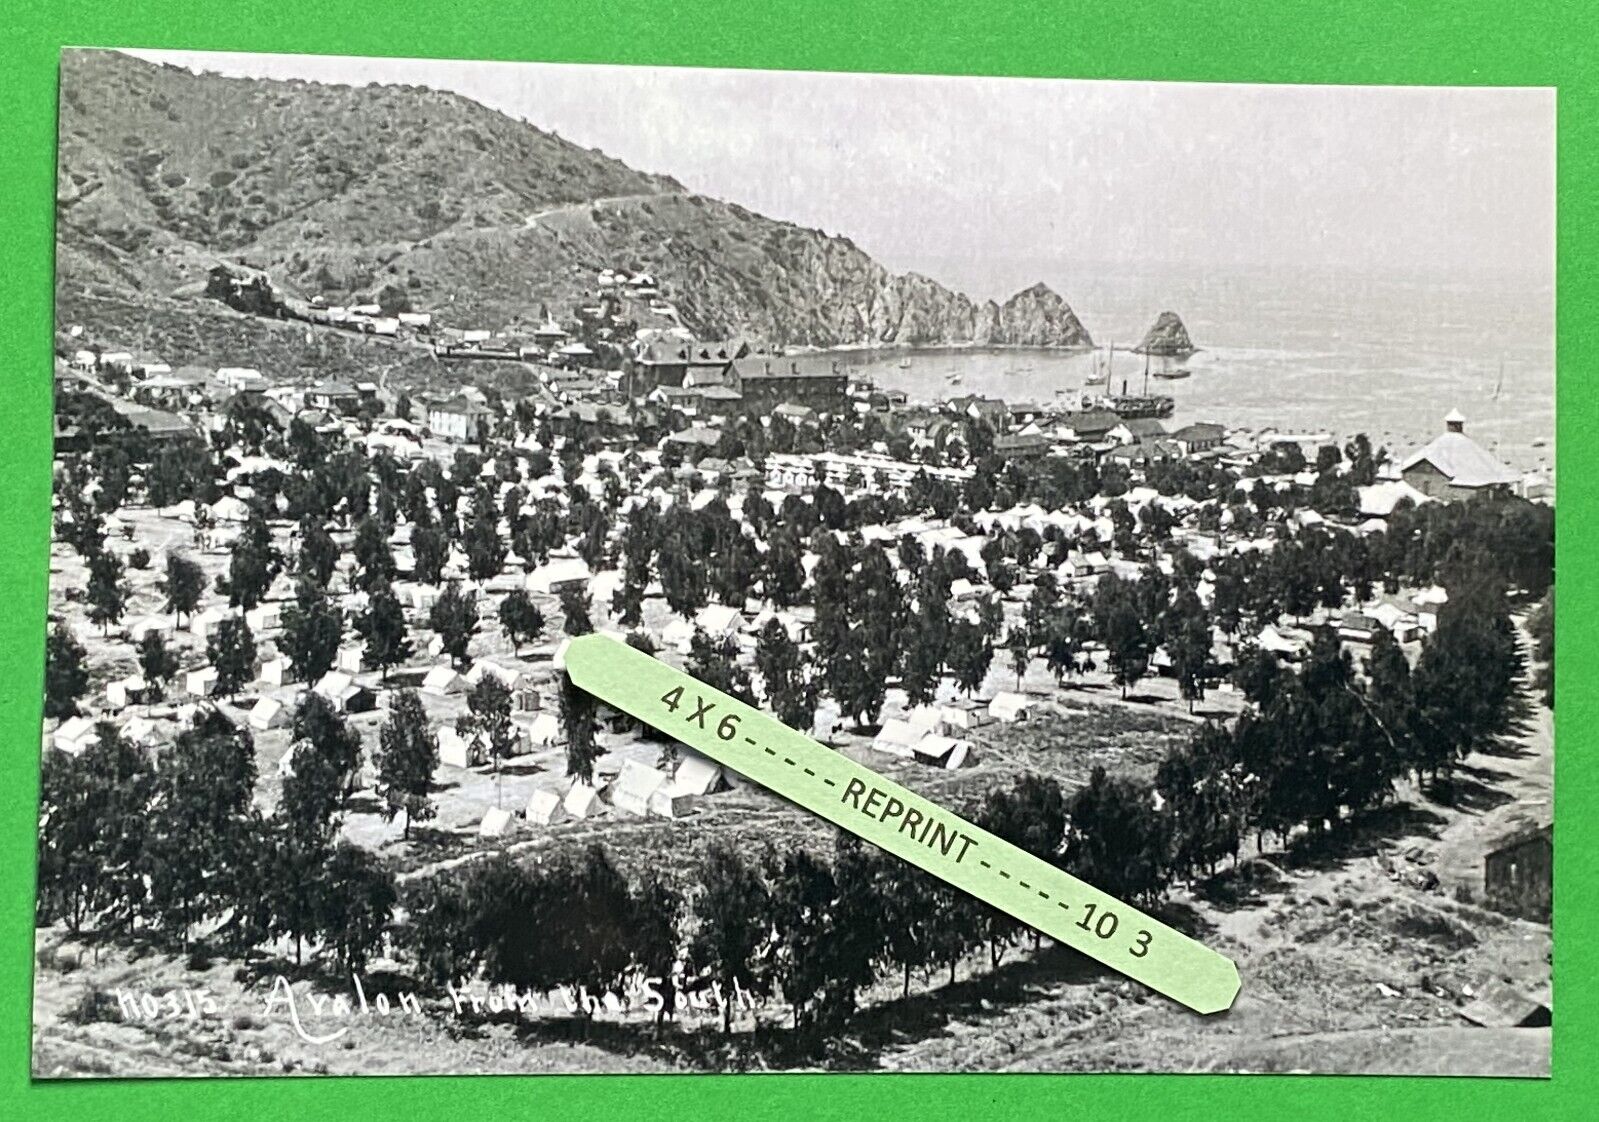 Found PHOTO of Old Town AVALON on Santa Catalina Island and Tent City